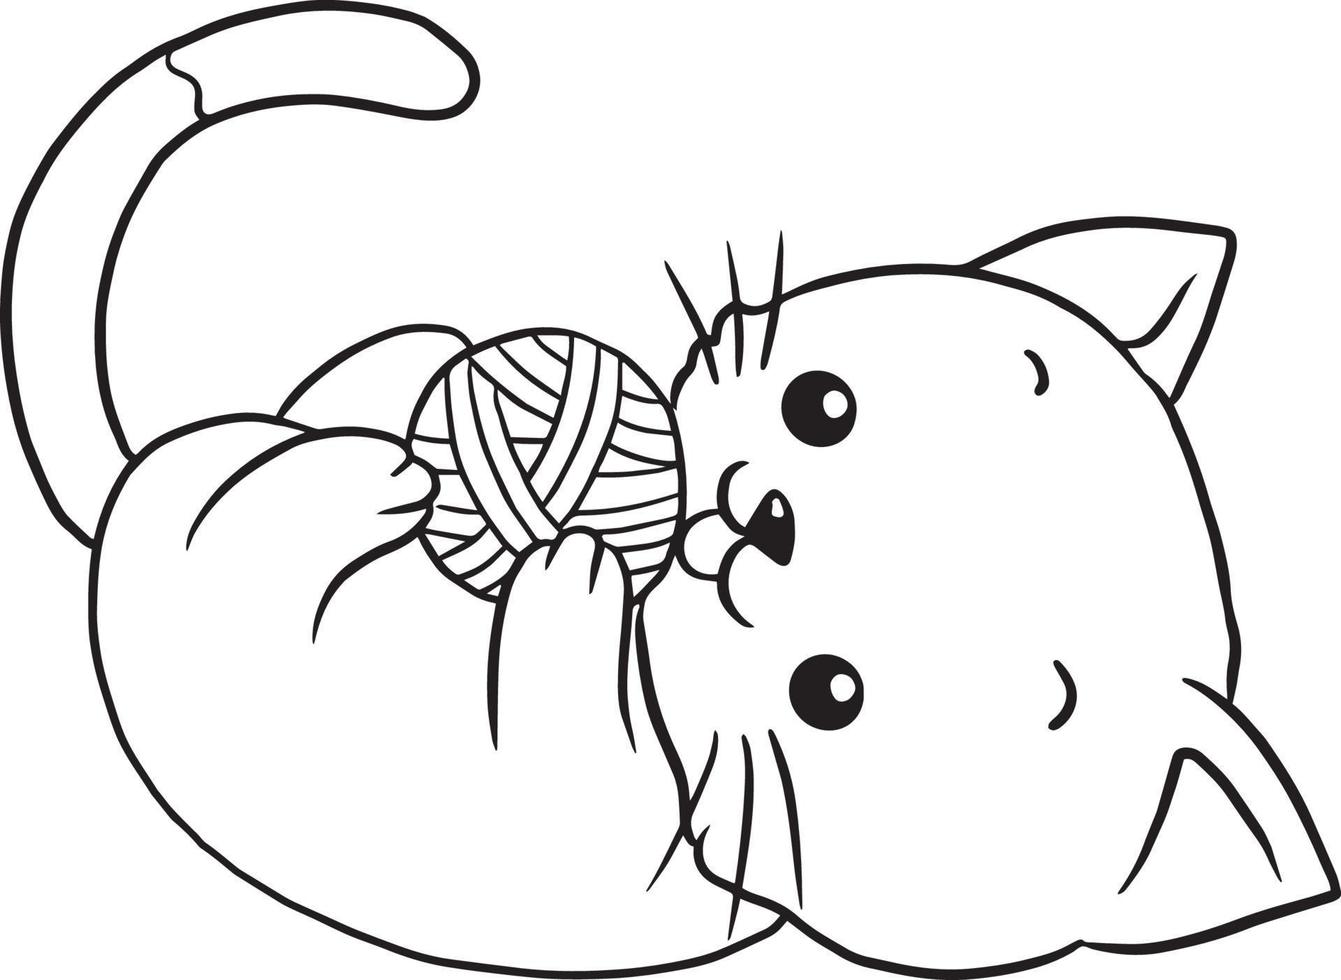 Anime Cats Coloring Pages - kawaii Anime Cats Coloring Pages